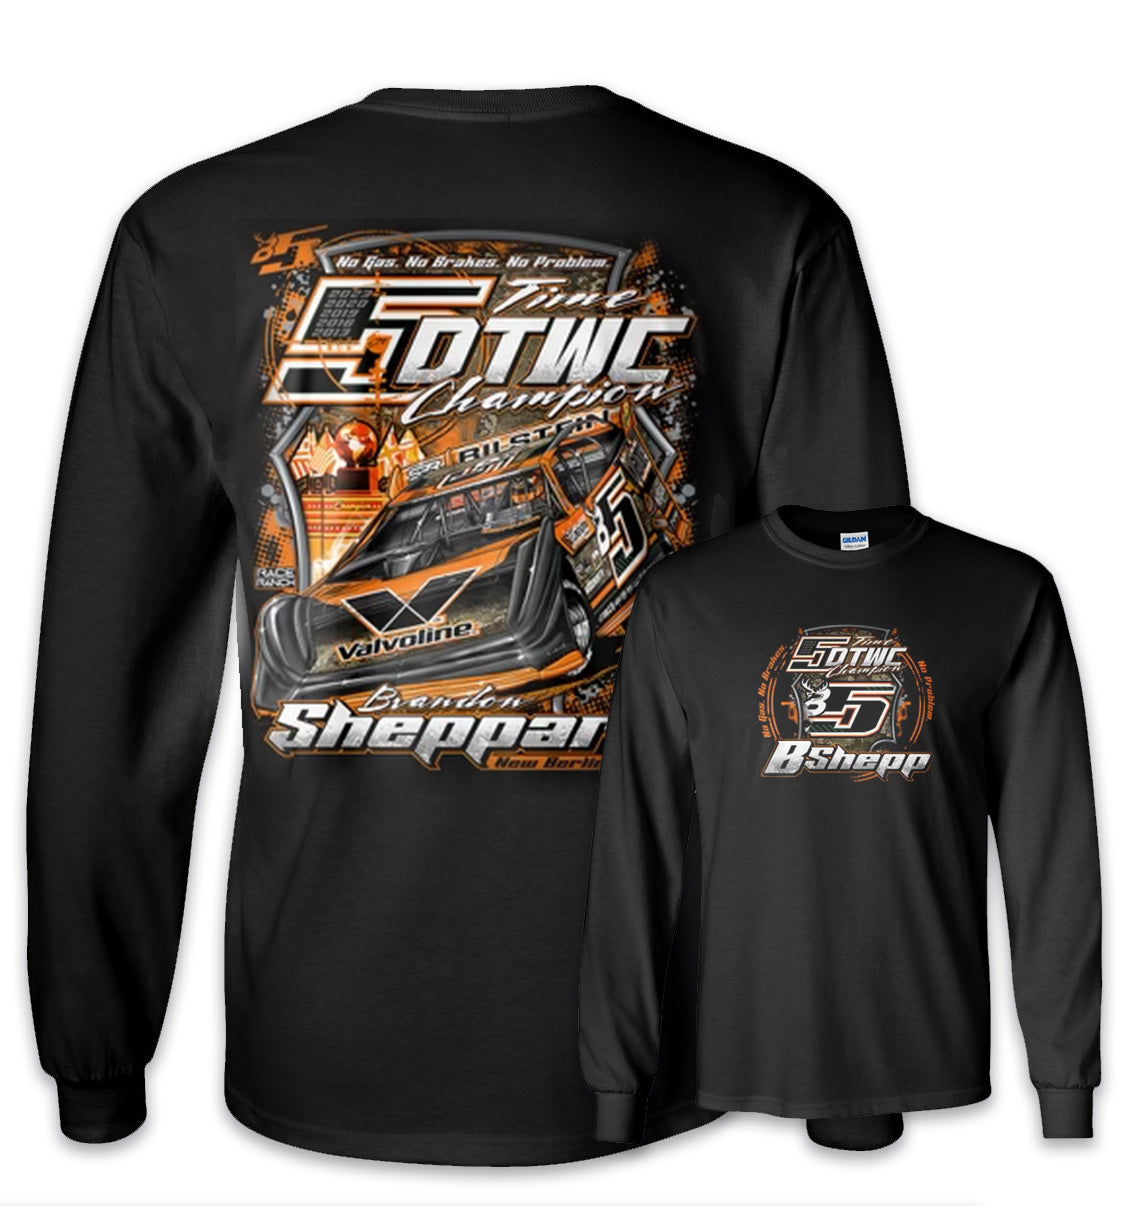 2023 "5X DTWC CHAMPION" LONG SLEEVE